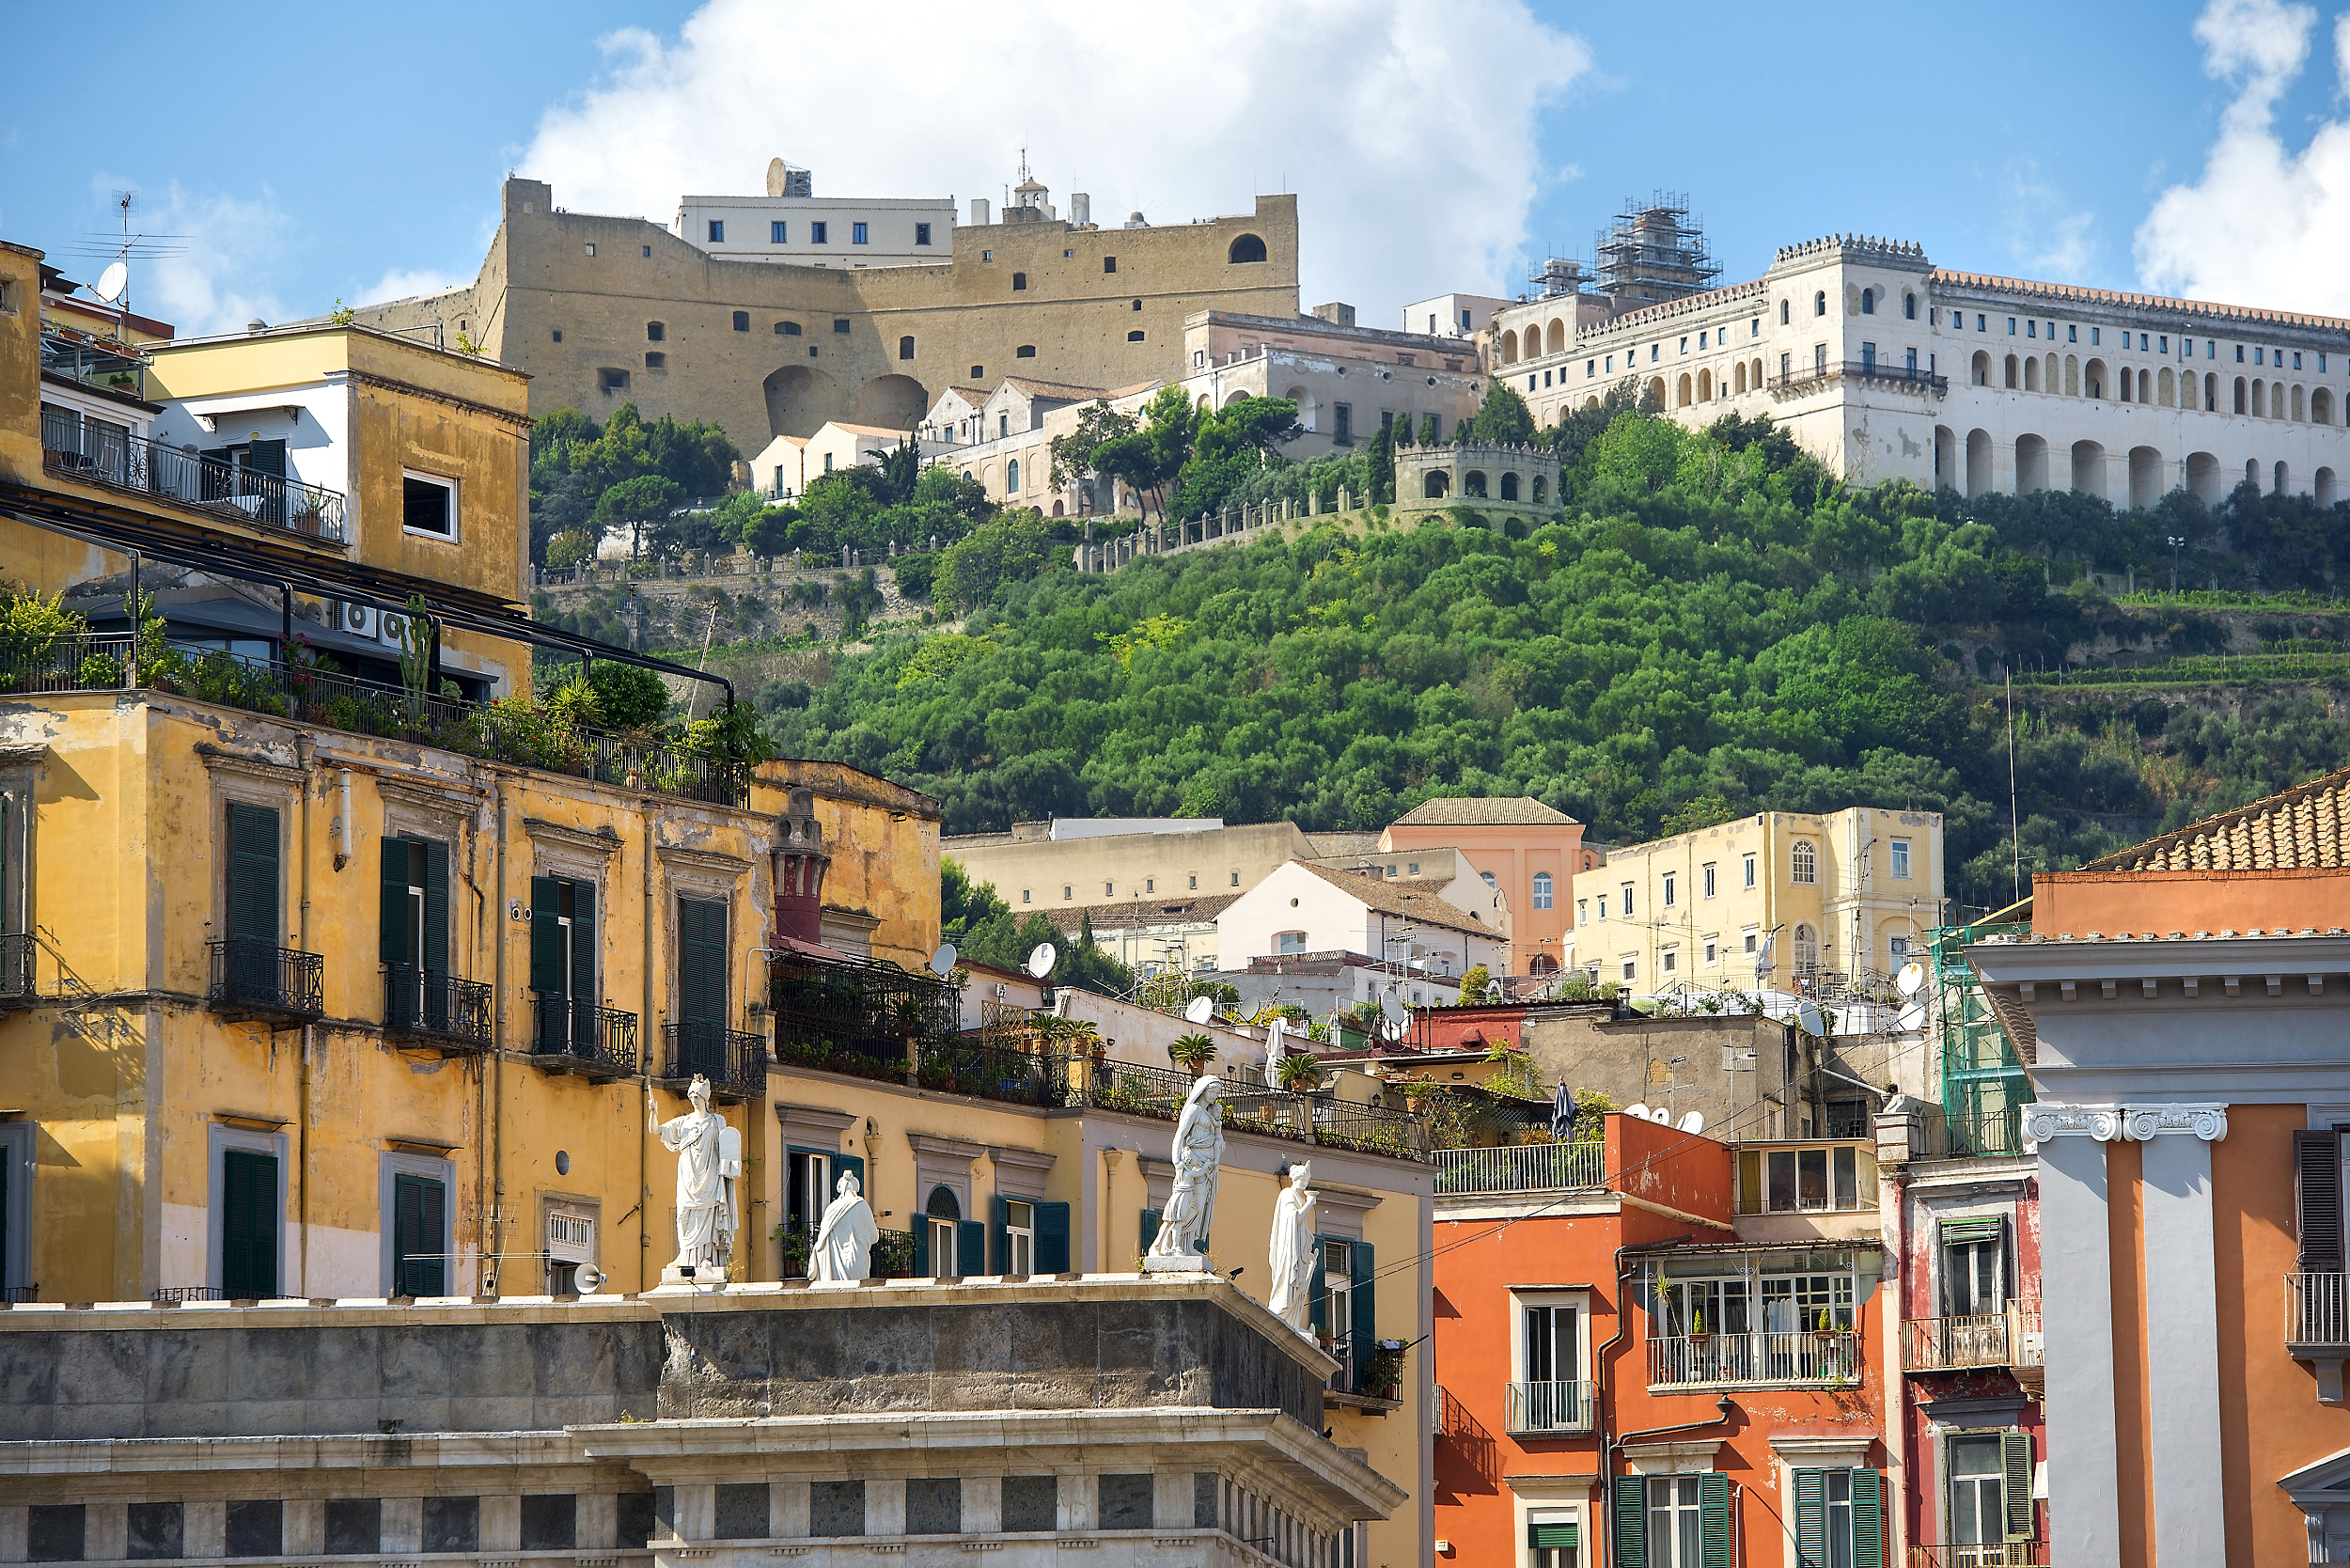 Latest travel itineraries for Castel Sant'Elmo in July (updated in 2023), Sant'Elmo reviews, Castel Sant'Elmo address and opening hours, popular attractions, hotels, and restaurants near Castel Sant'Elmo - Trip.com